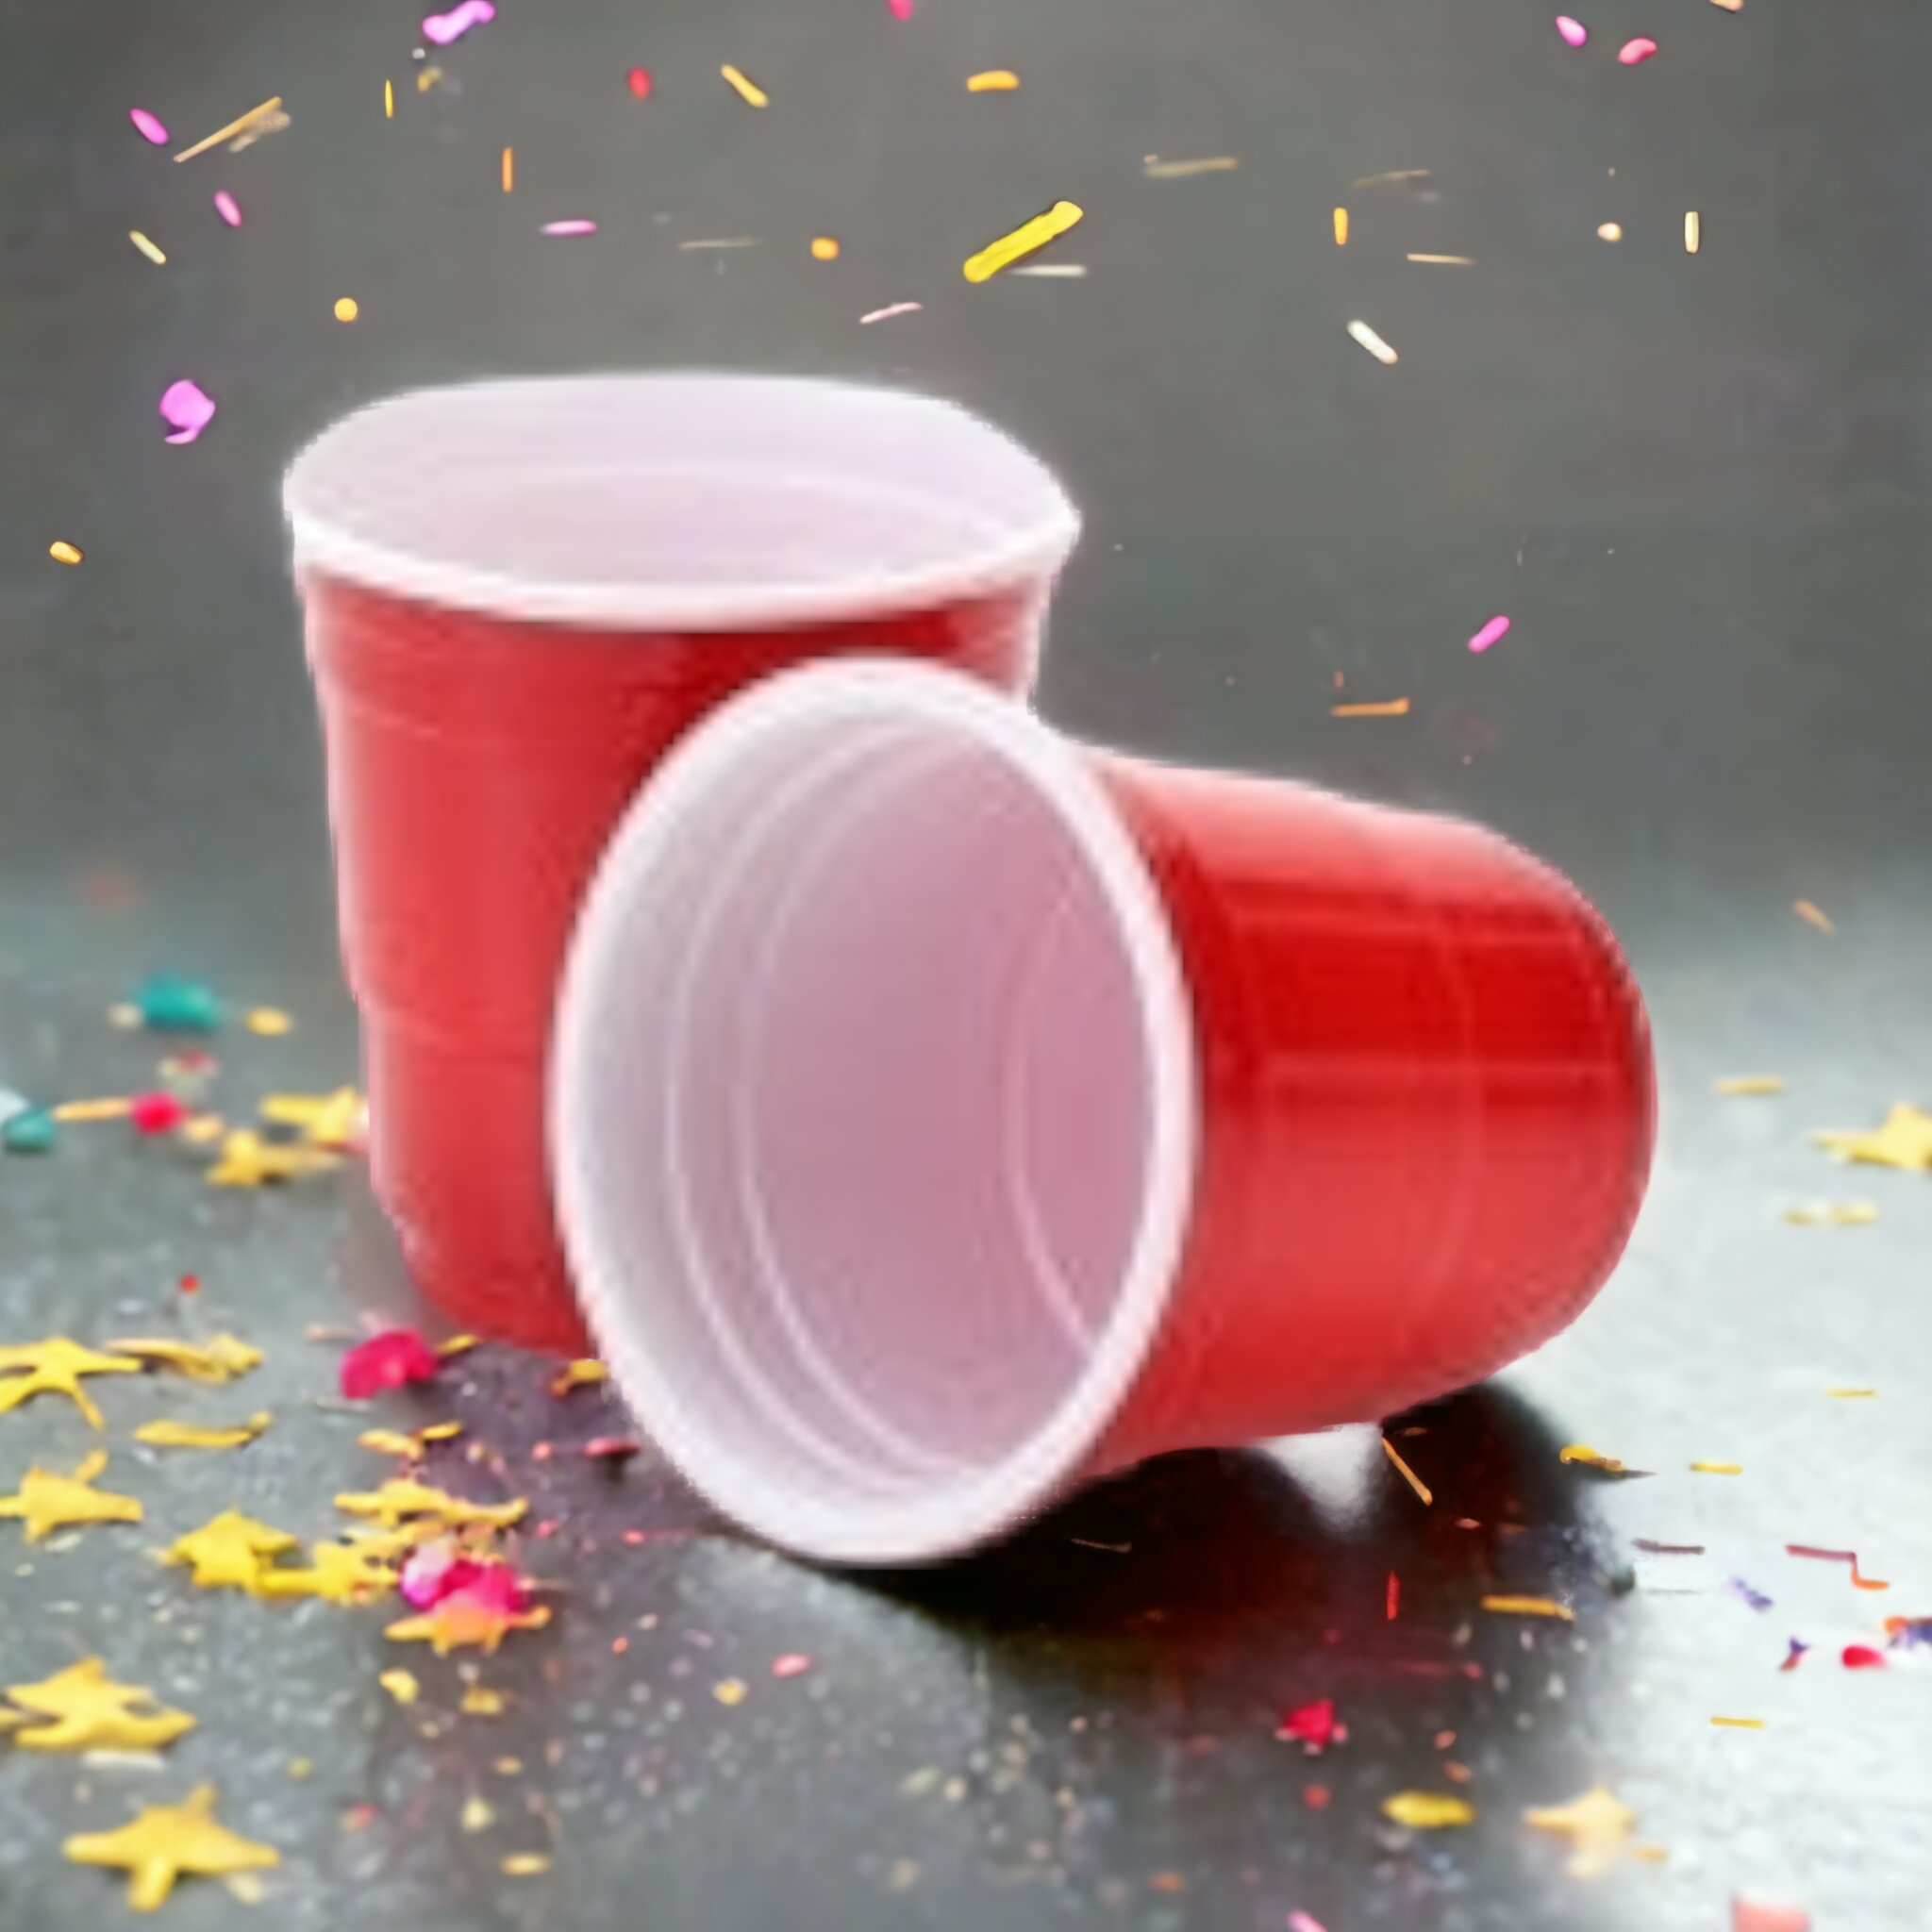 60ml Plastic Party Cup 10pack